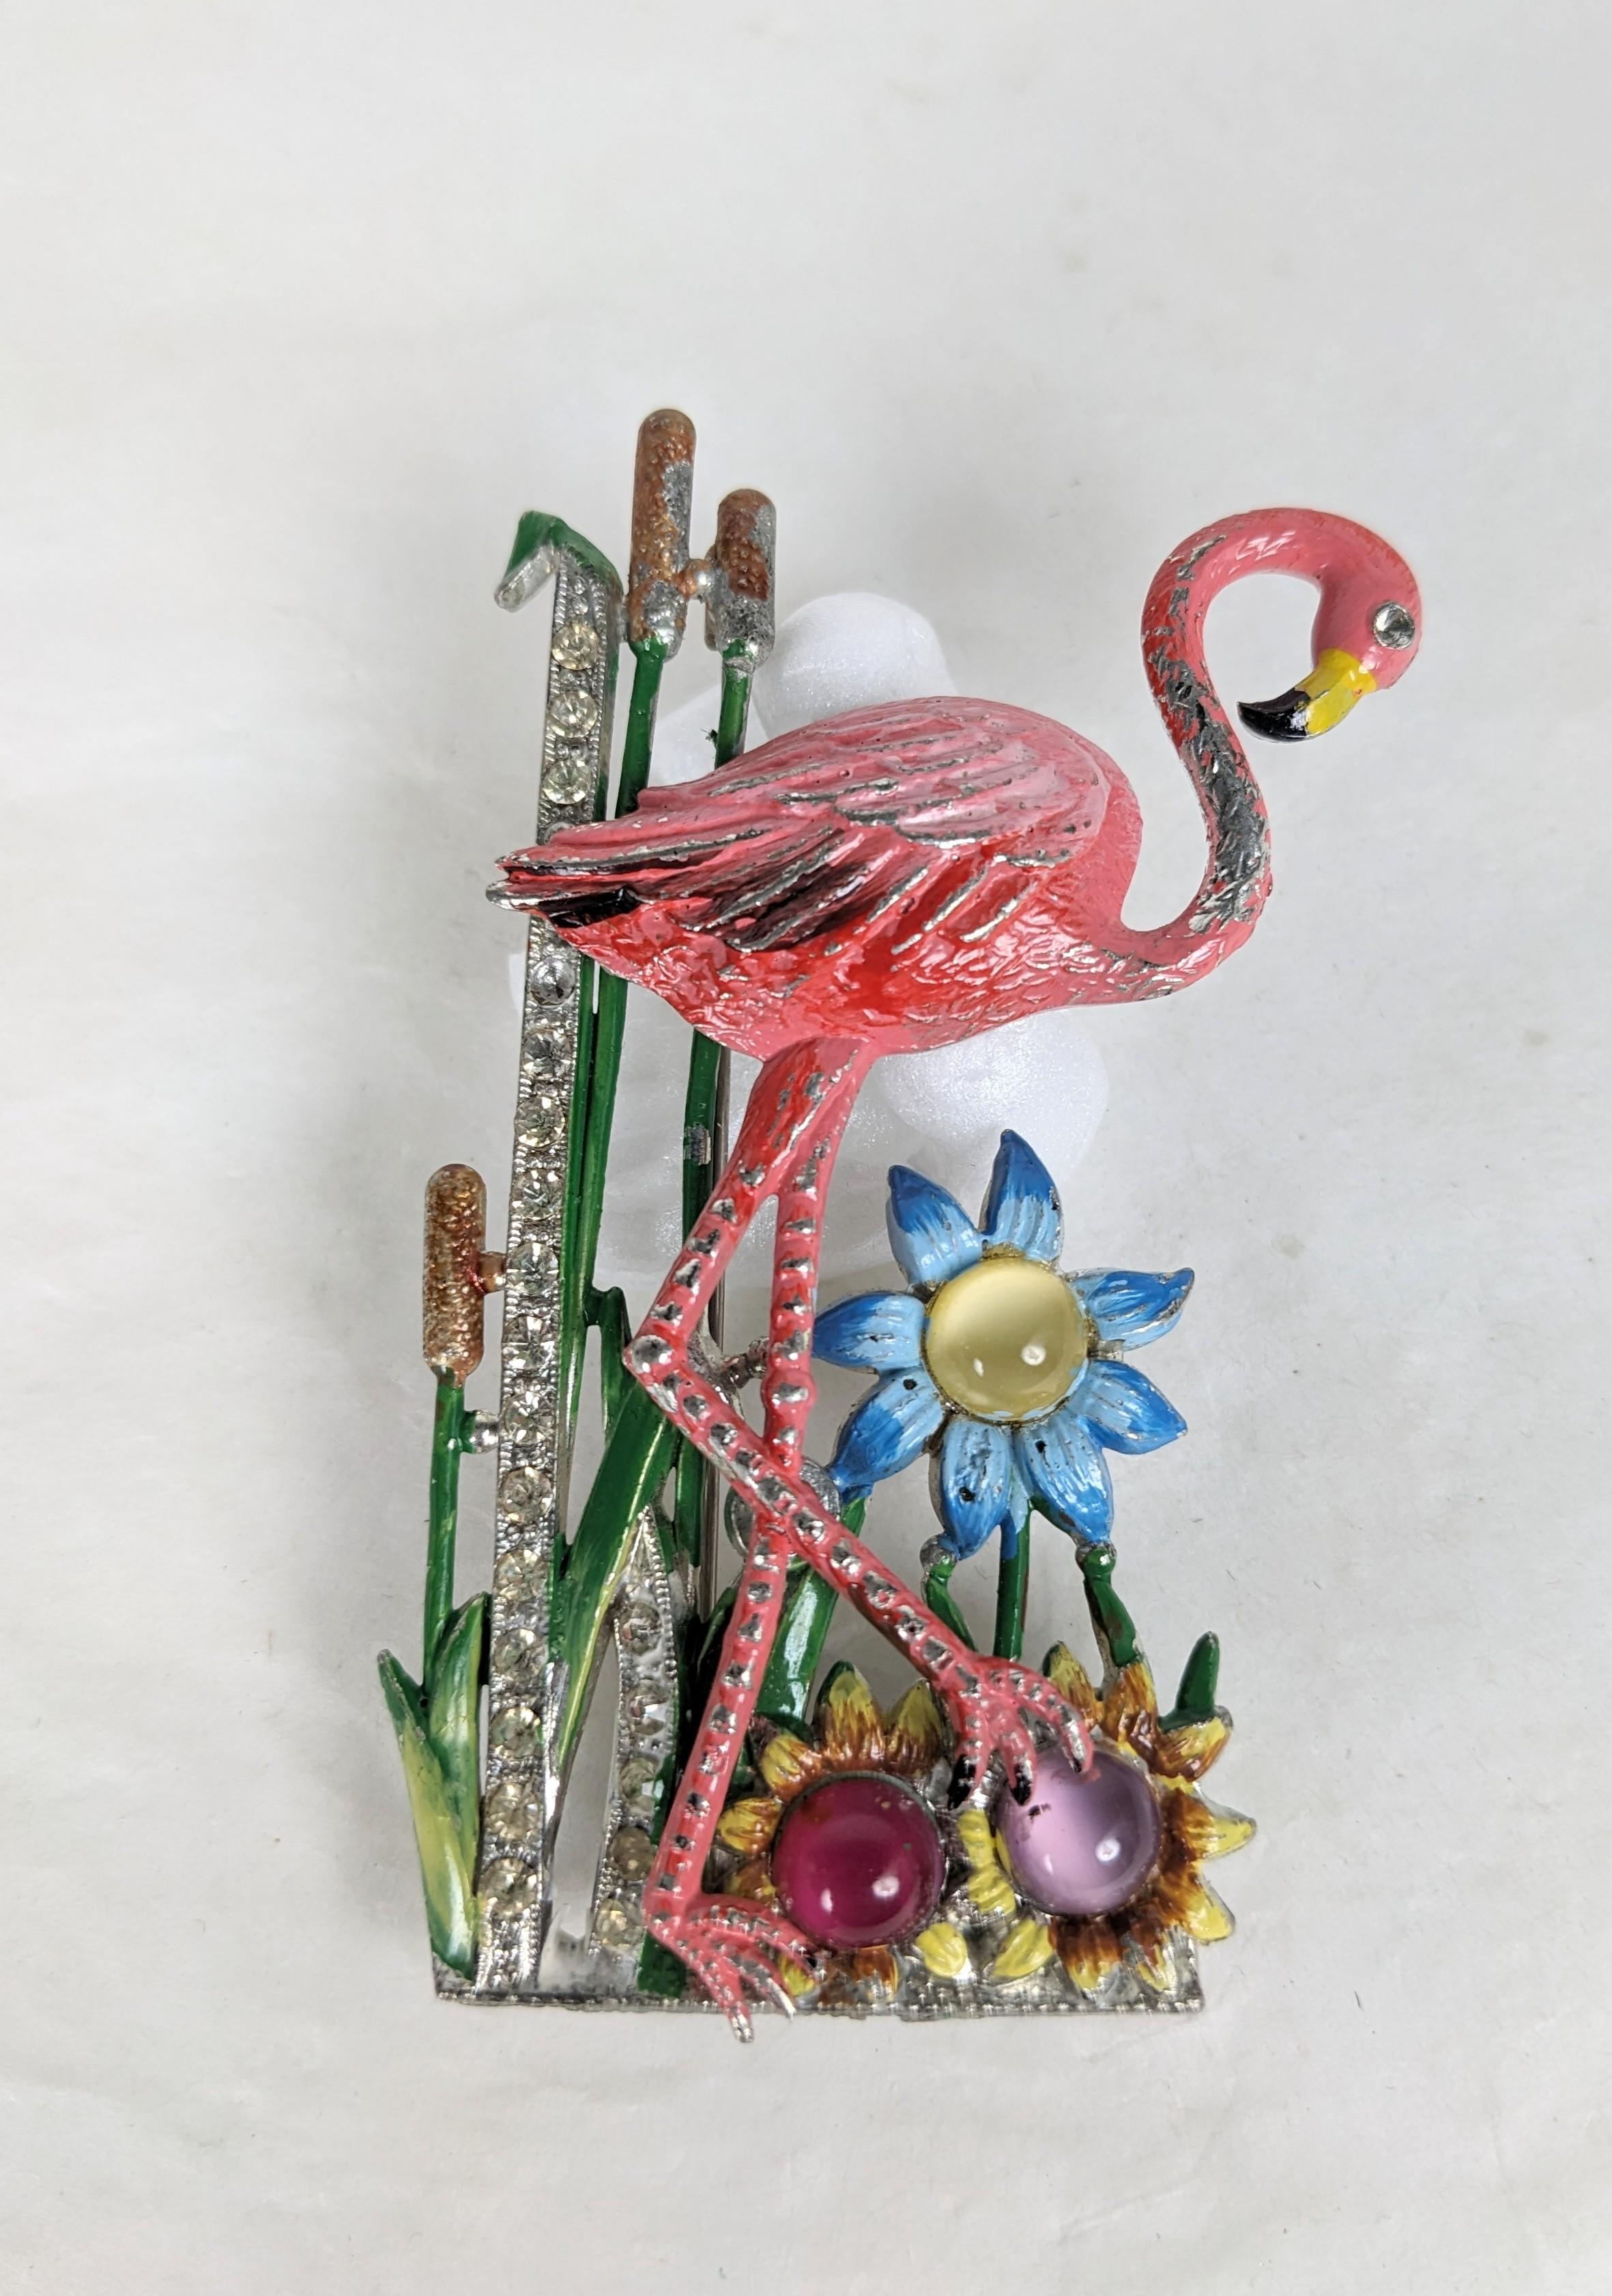 Charming Art Deco Novelty Flamingo Brooch from the 1930's. Likely made by Coro with pave accents and enamel highlights set with moonglow cabochons. 3